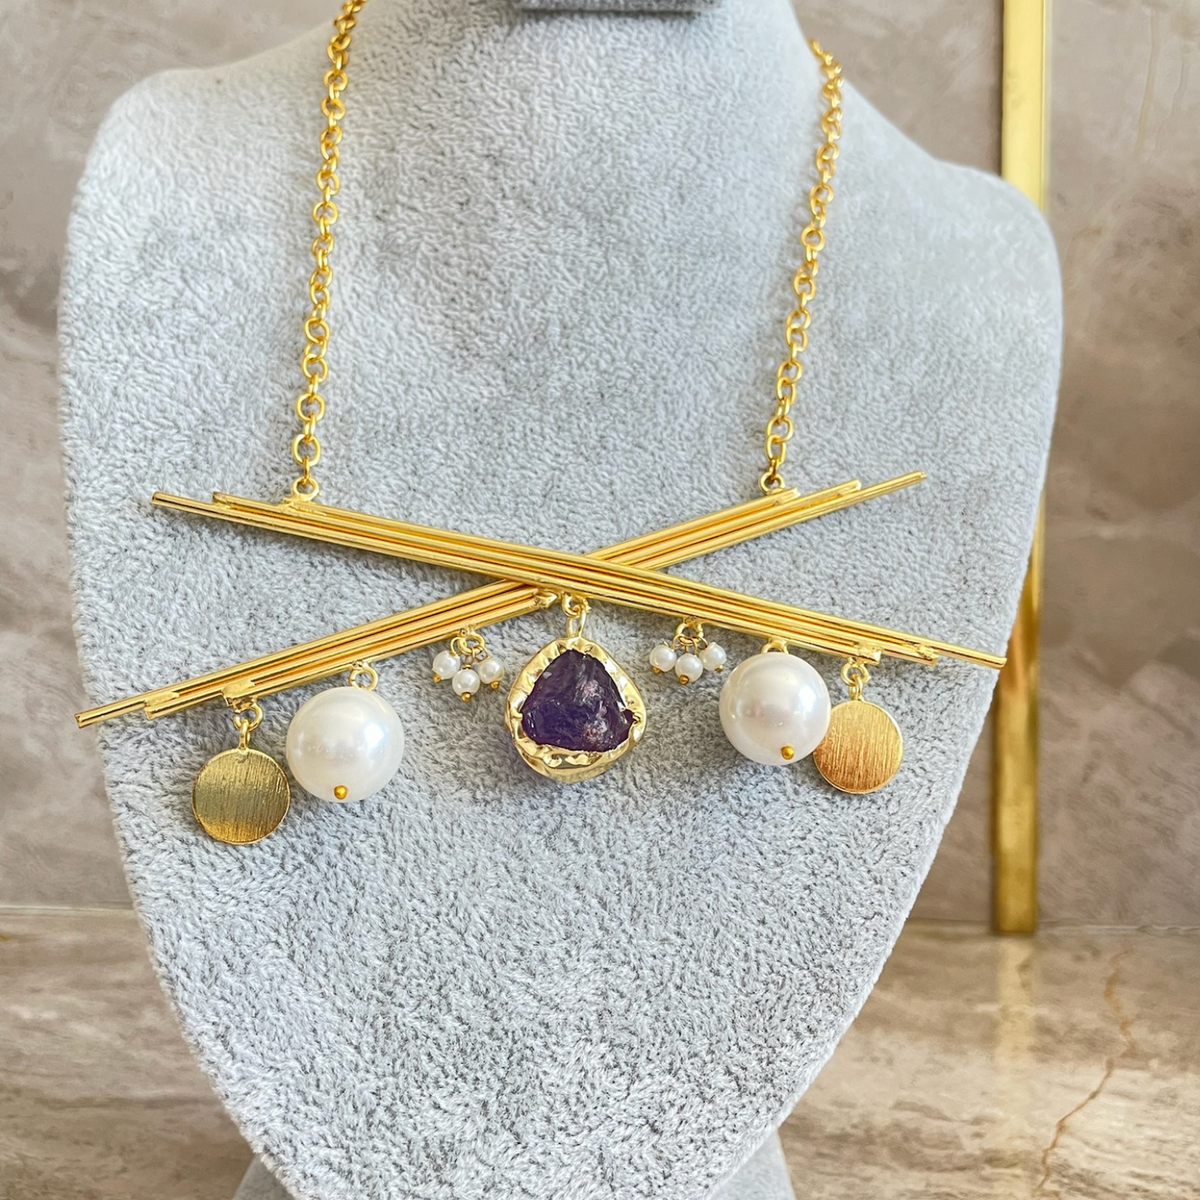 Geometric Statement Necklace with Pearl & Purple Stone